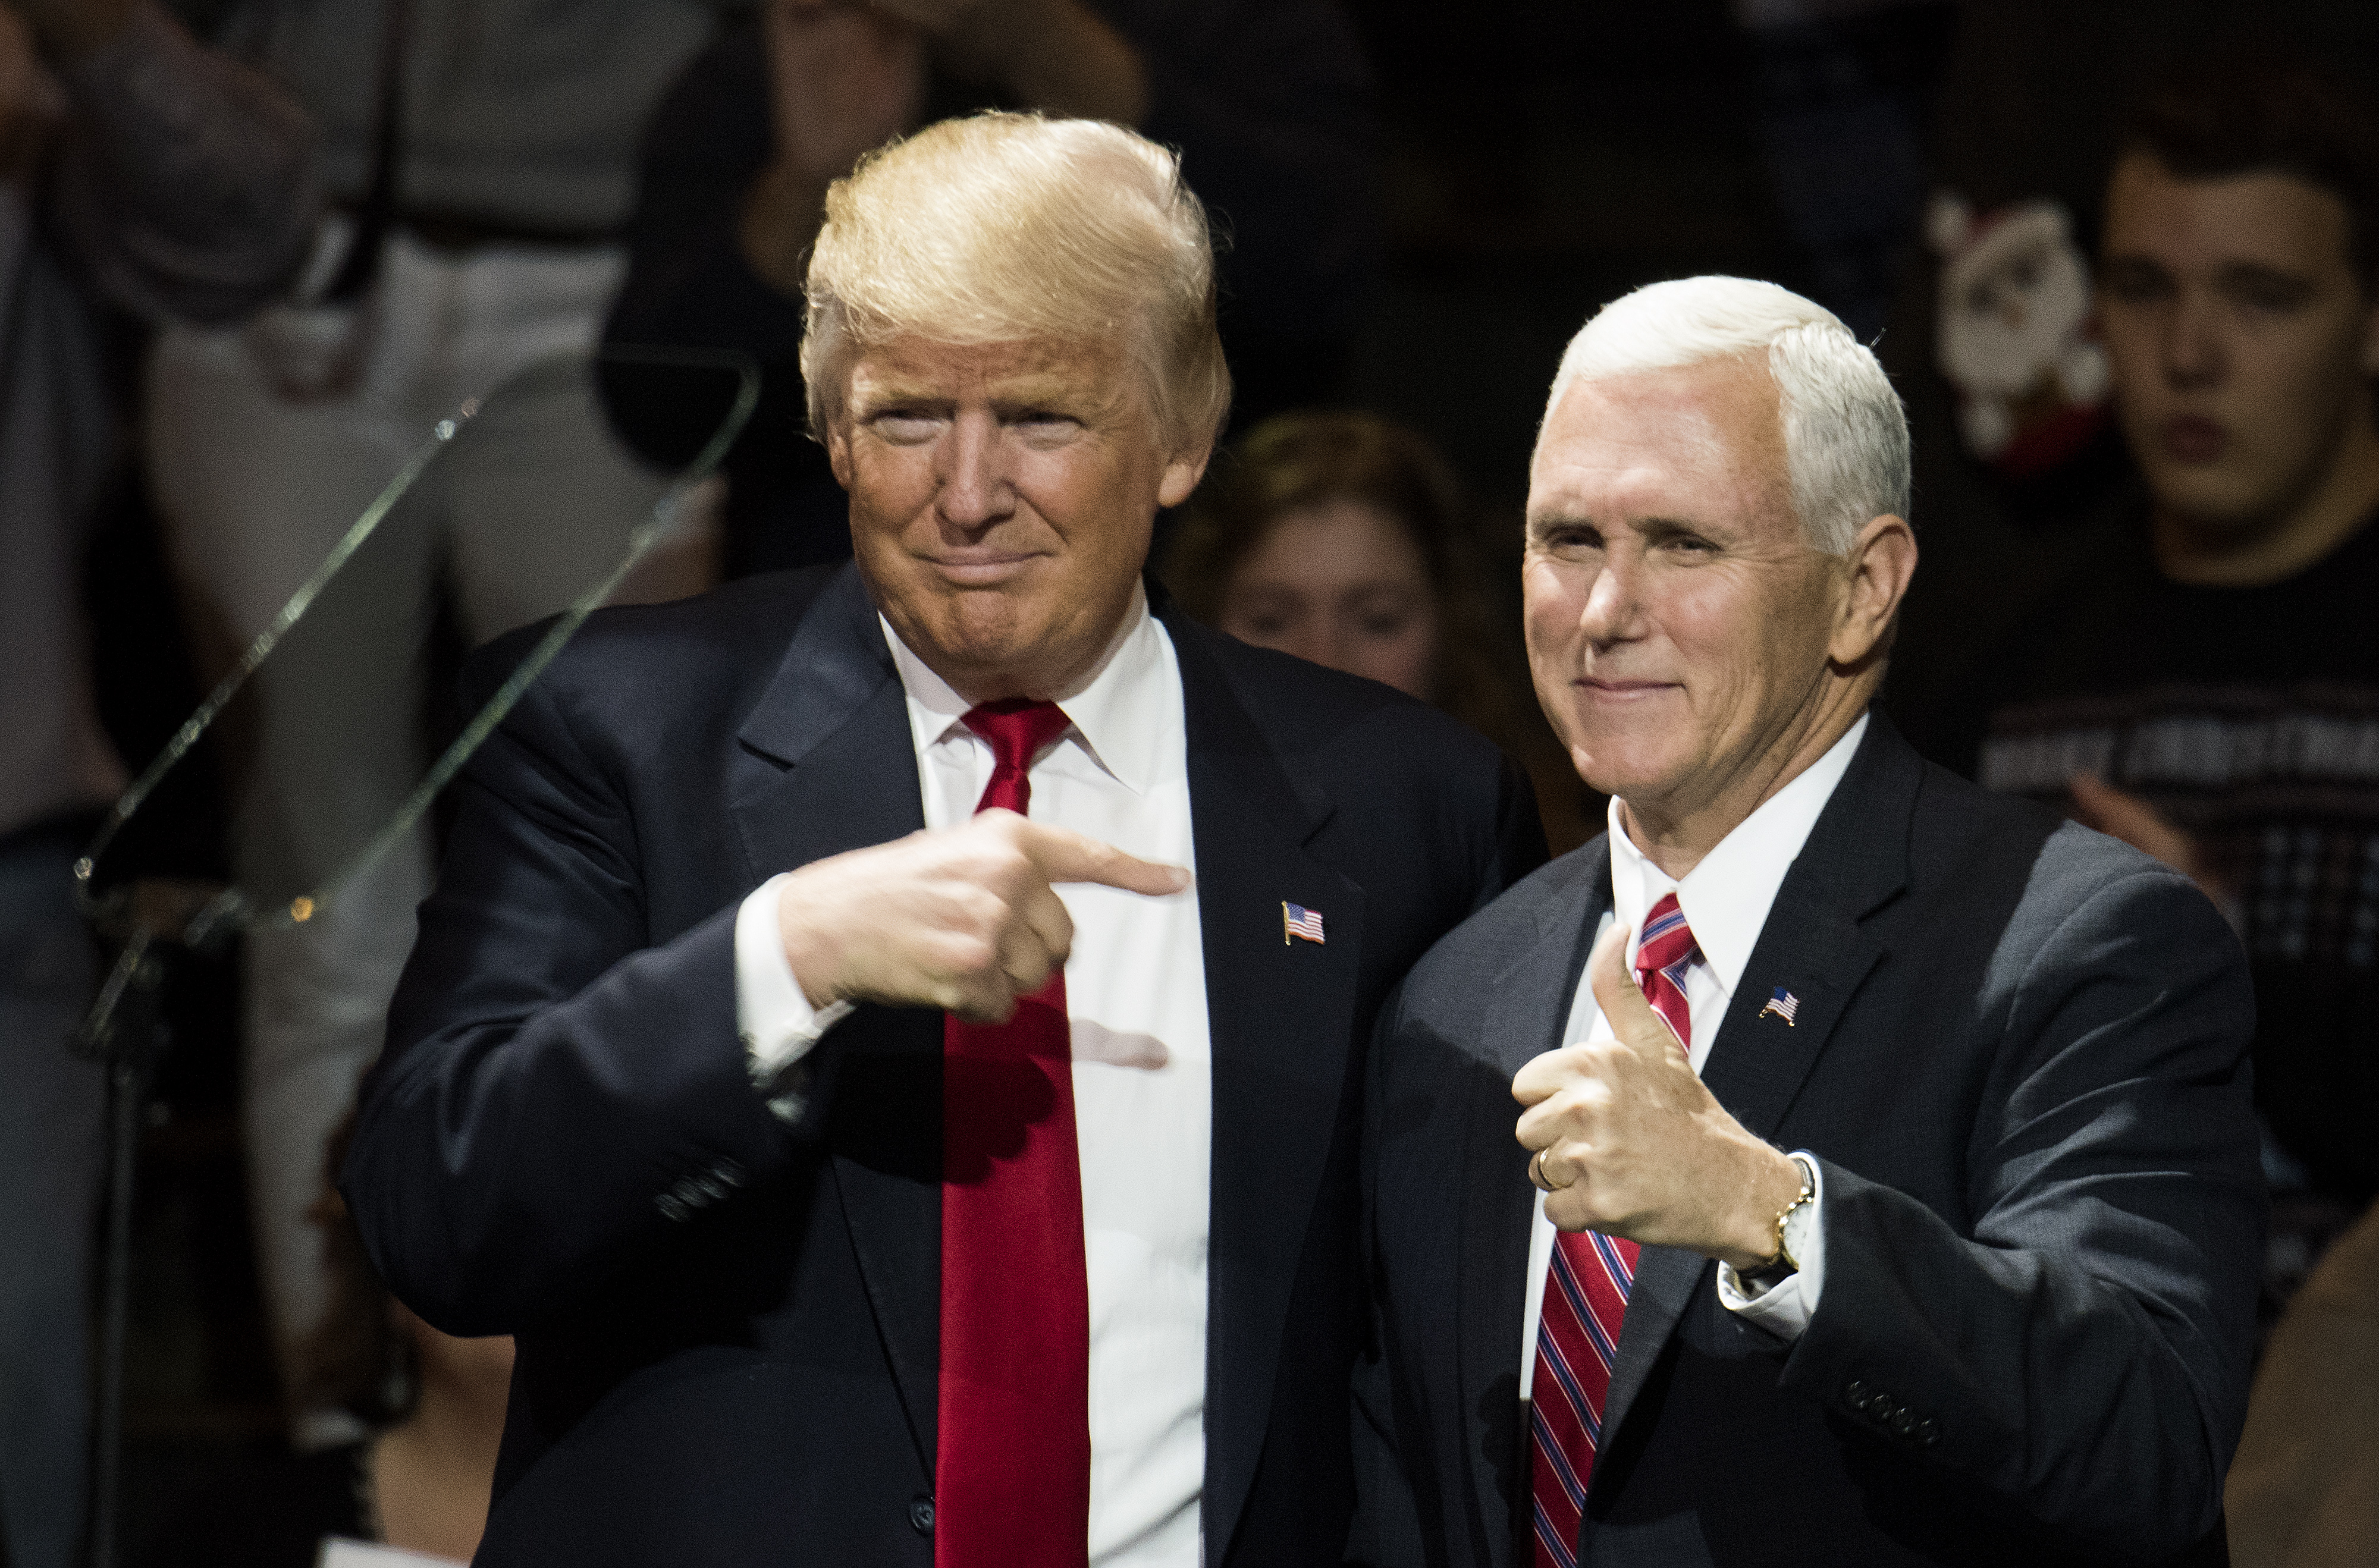 President-elect Donald Trump and Vice President-elect Mike Pence stand onstage together at U.S. Bank Arena in Cincinnati on Dec. 1, 2016.